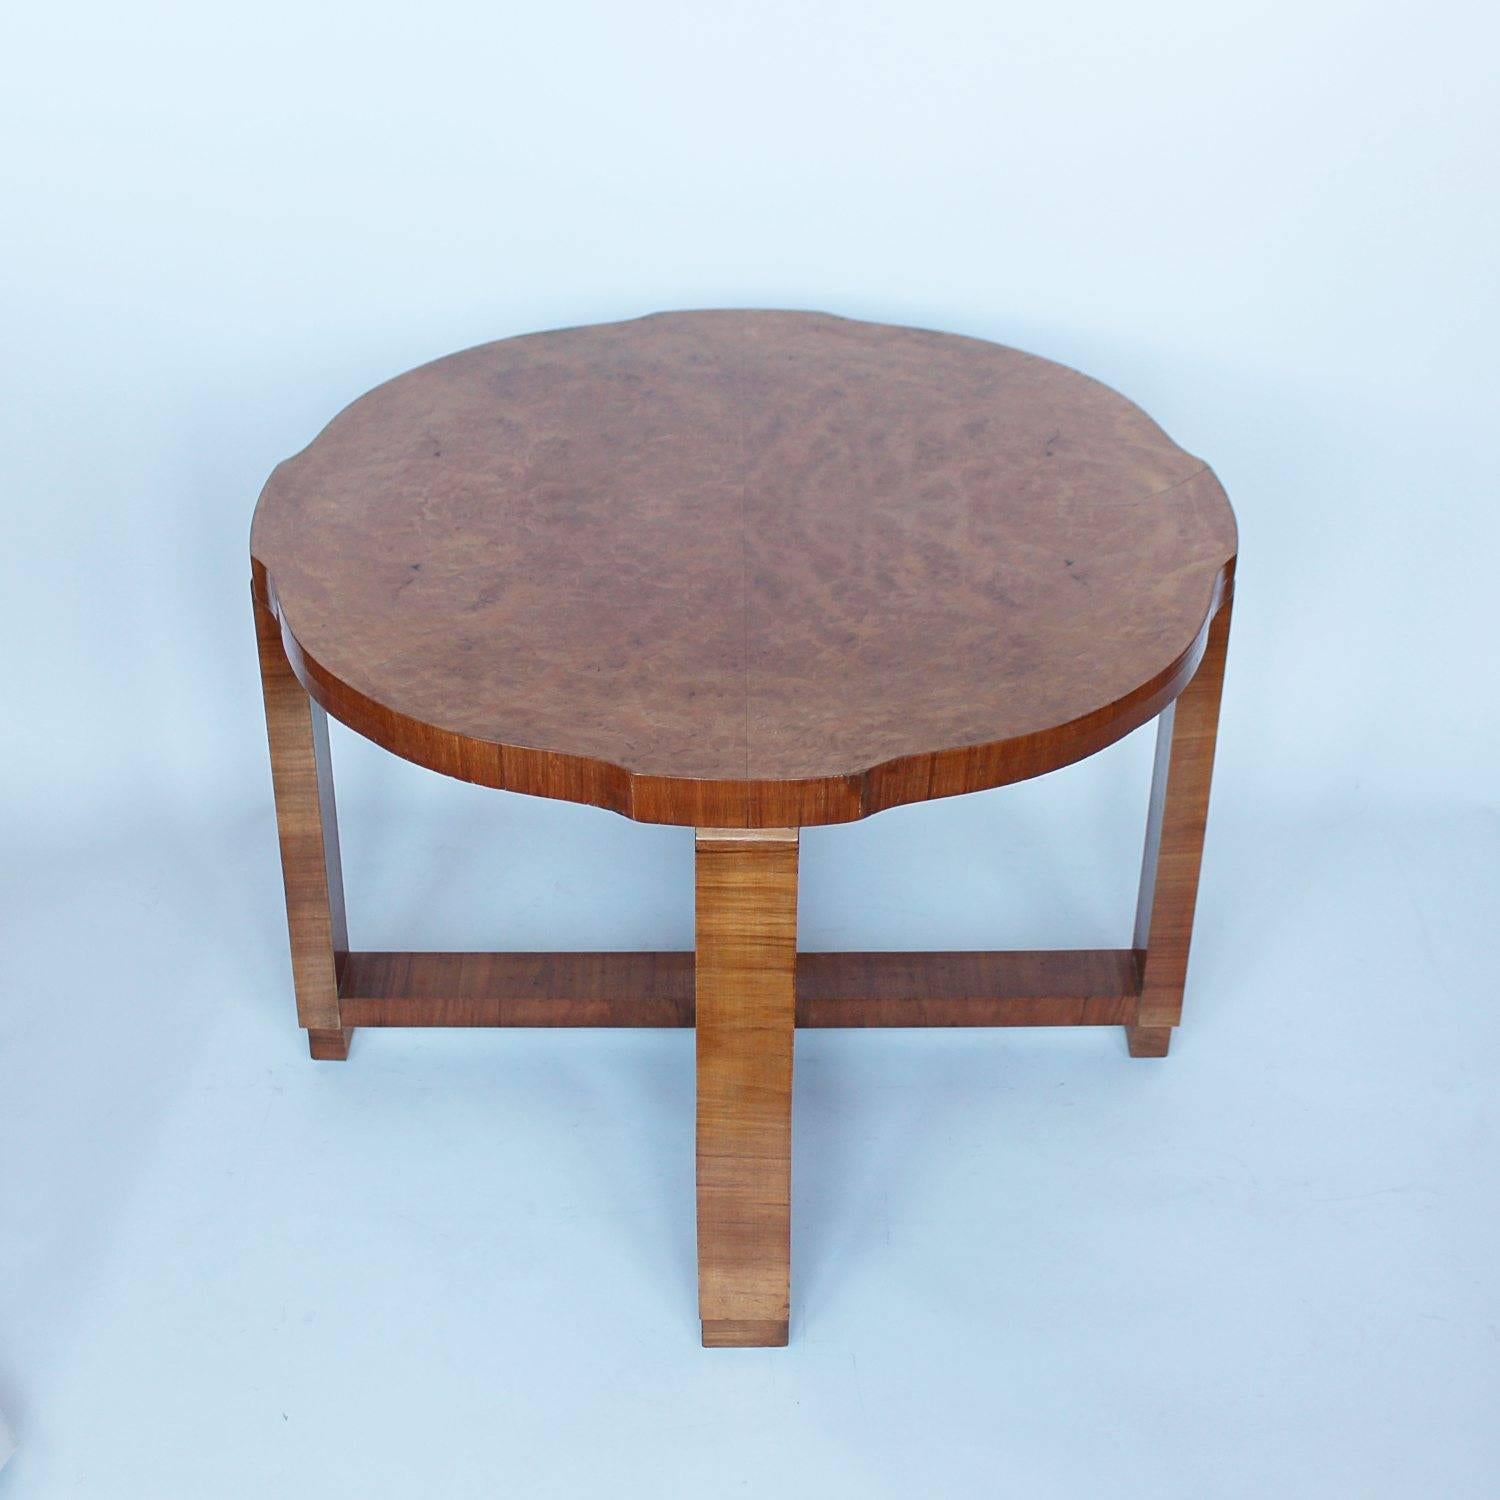 English Art Deco Nest of Tables